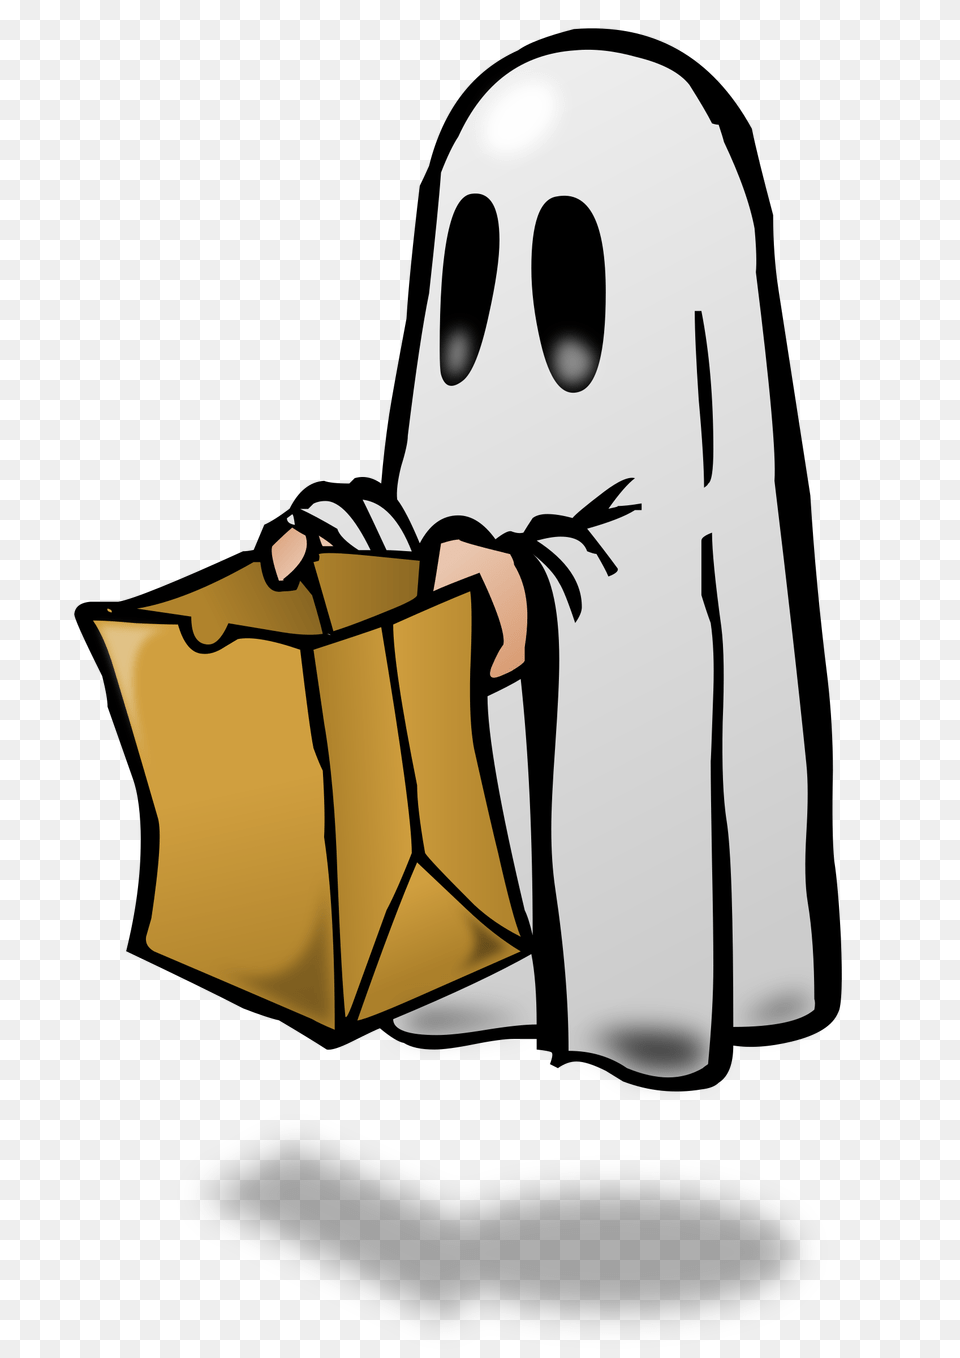 Image Result For Ghost Clip Art Clip Art And Gifs, Bag, Shopping Bag, Adult, Female Free Png